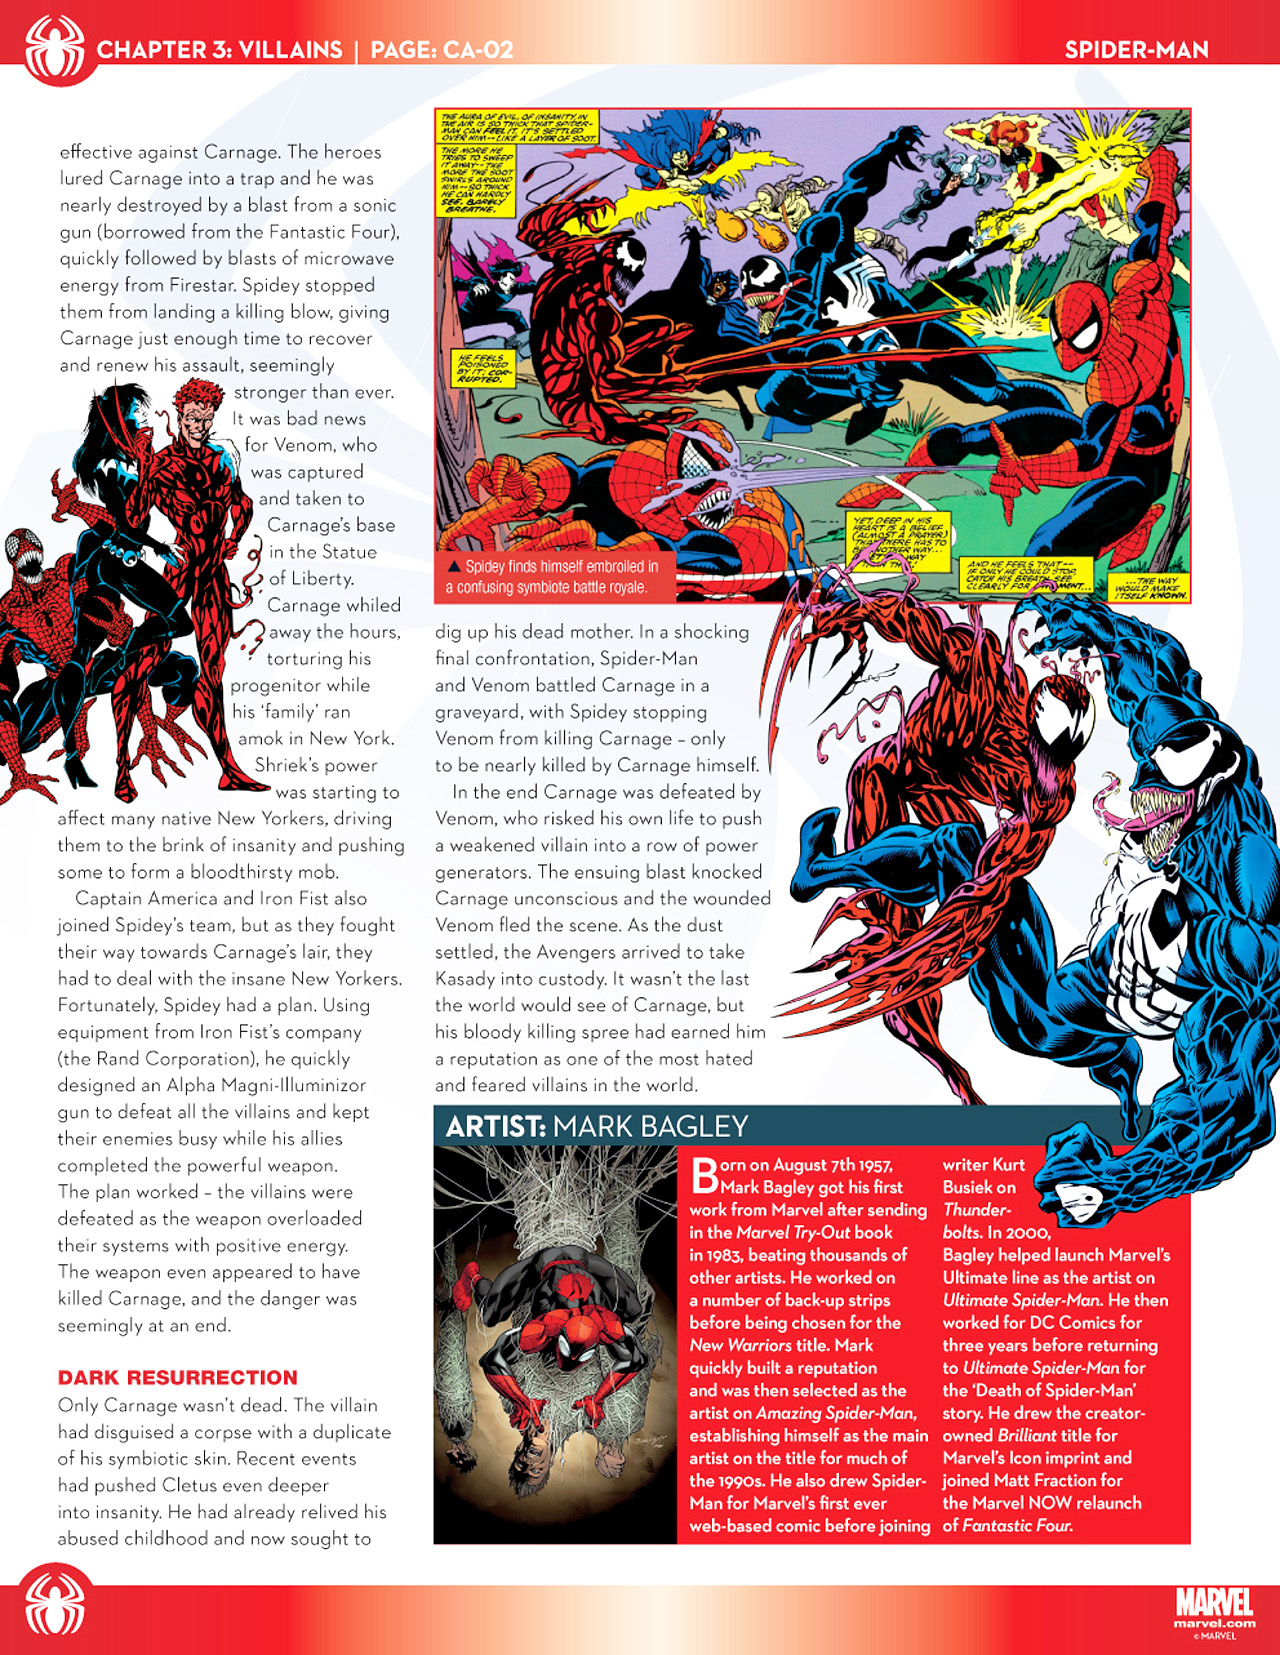 Read online Marvel Fact Files comic -  Issue #10 - 23